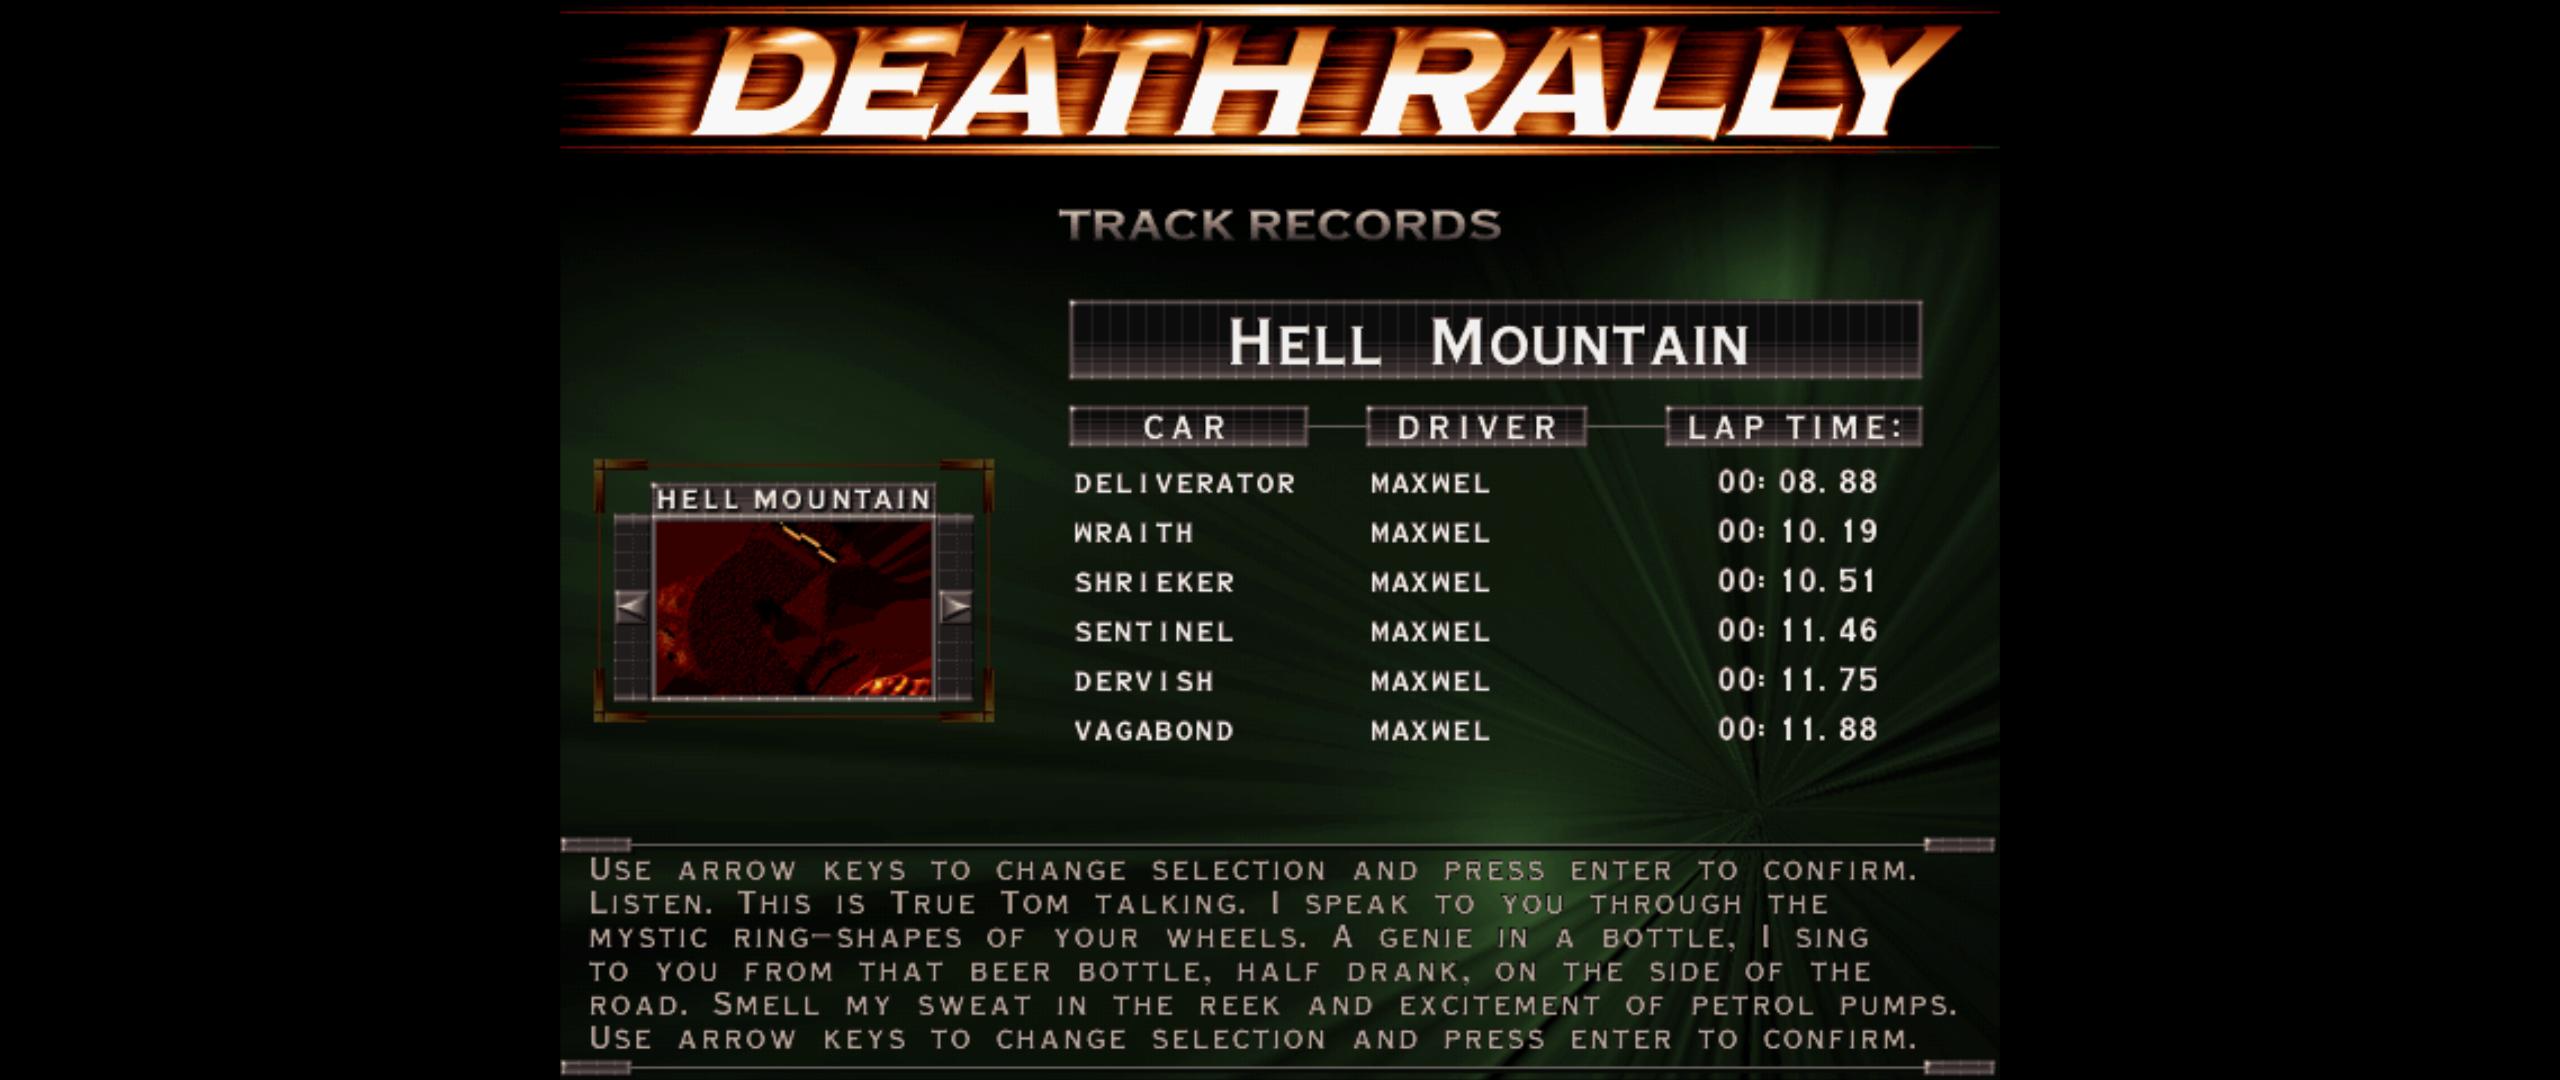 Maxwel: Death Rally [Hell Mountain, Deliverator Car] (PC) 0:00:08.88 points on 2016-03-04 05:54:04